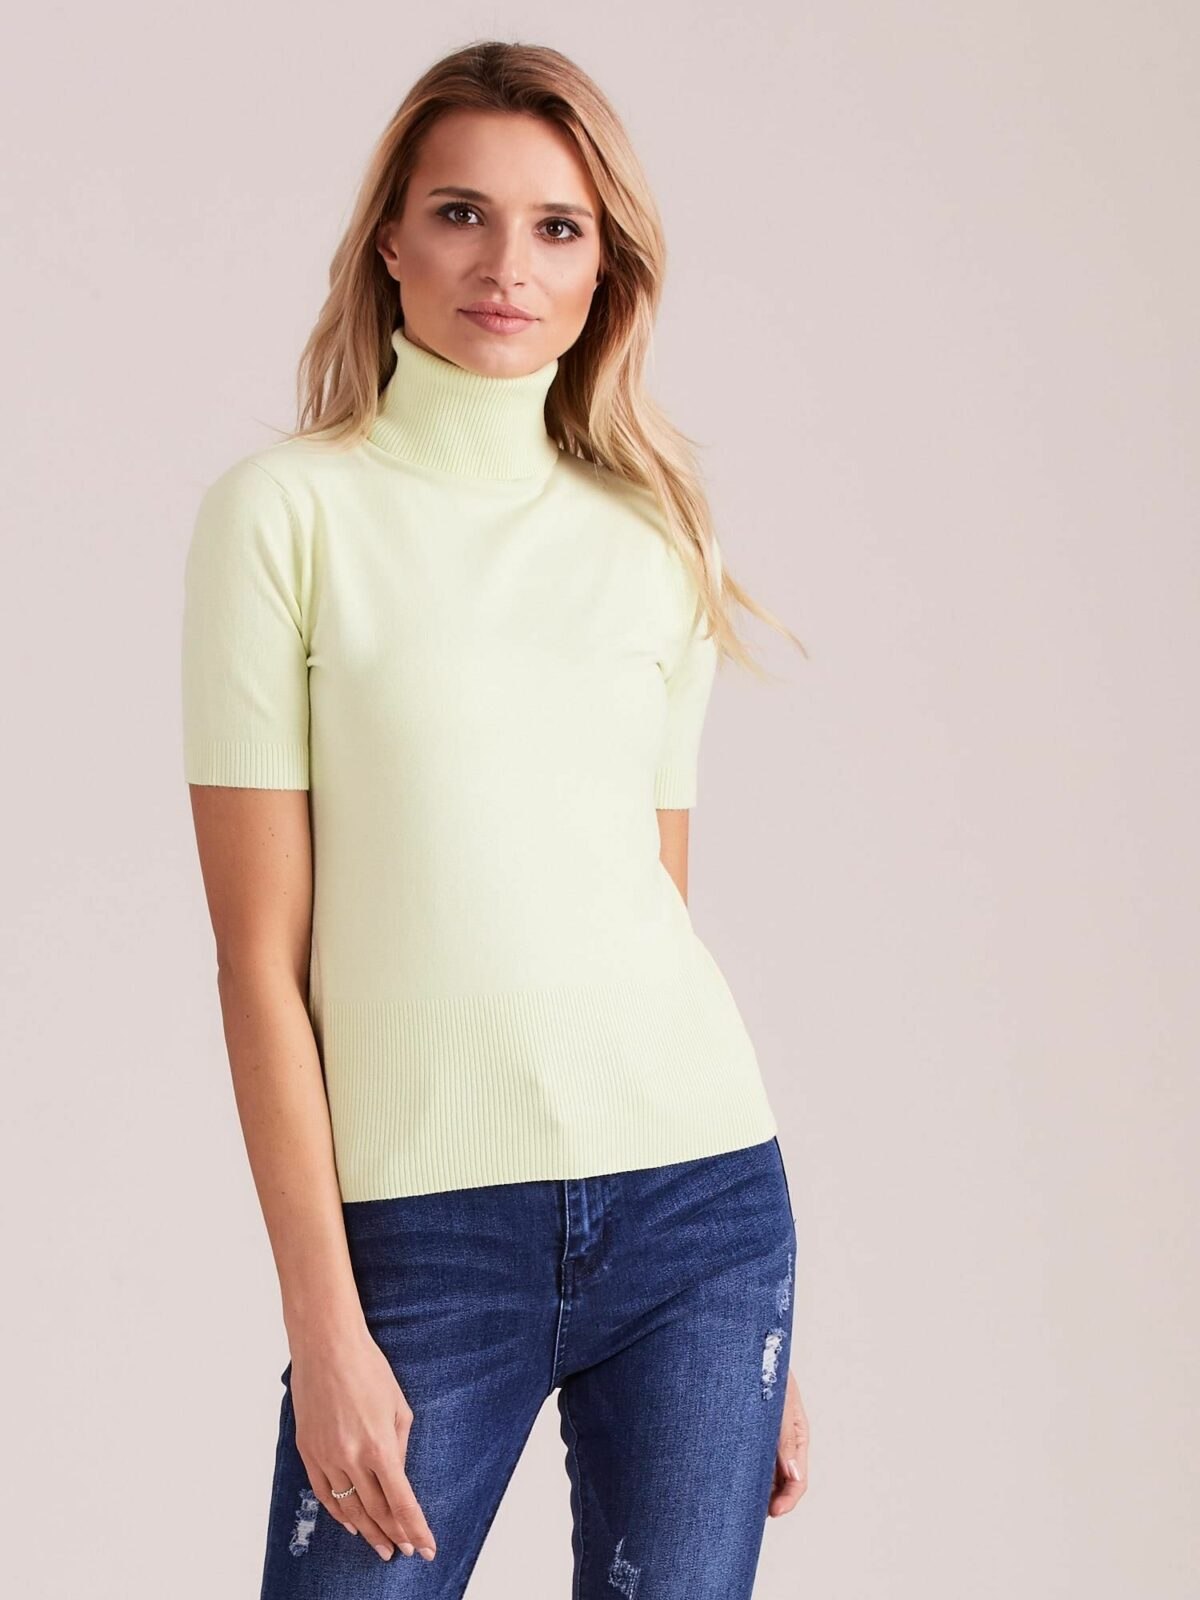 Light green sweater with short